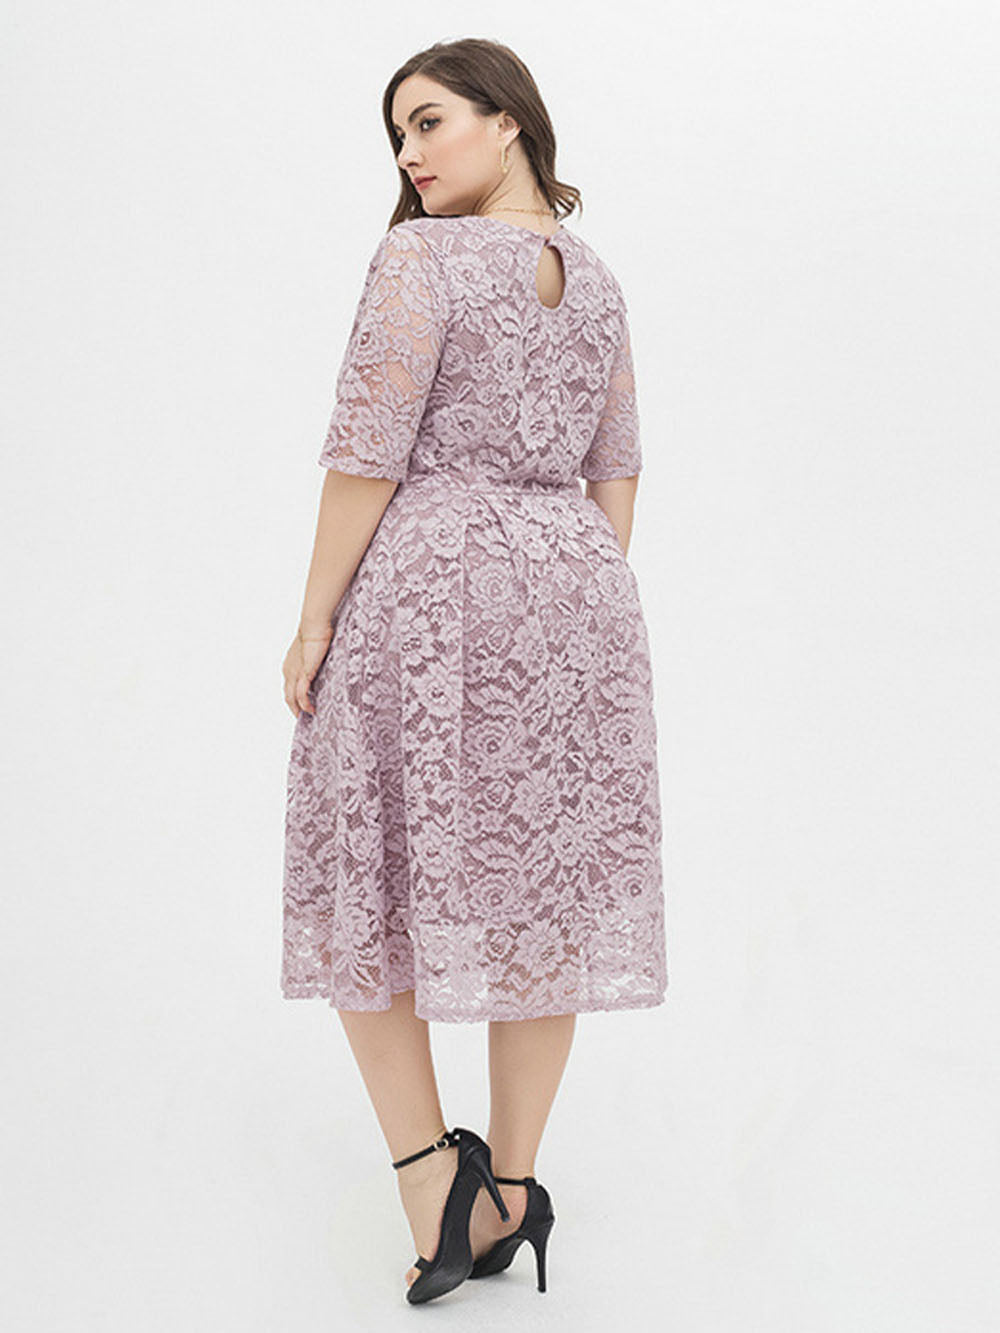 Sweet Skirt Plus Size Women Midi Dress| All For Me Today